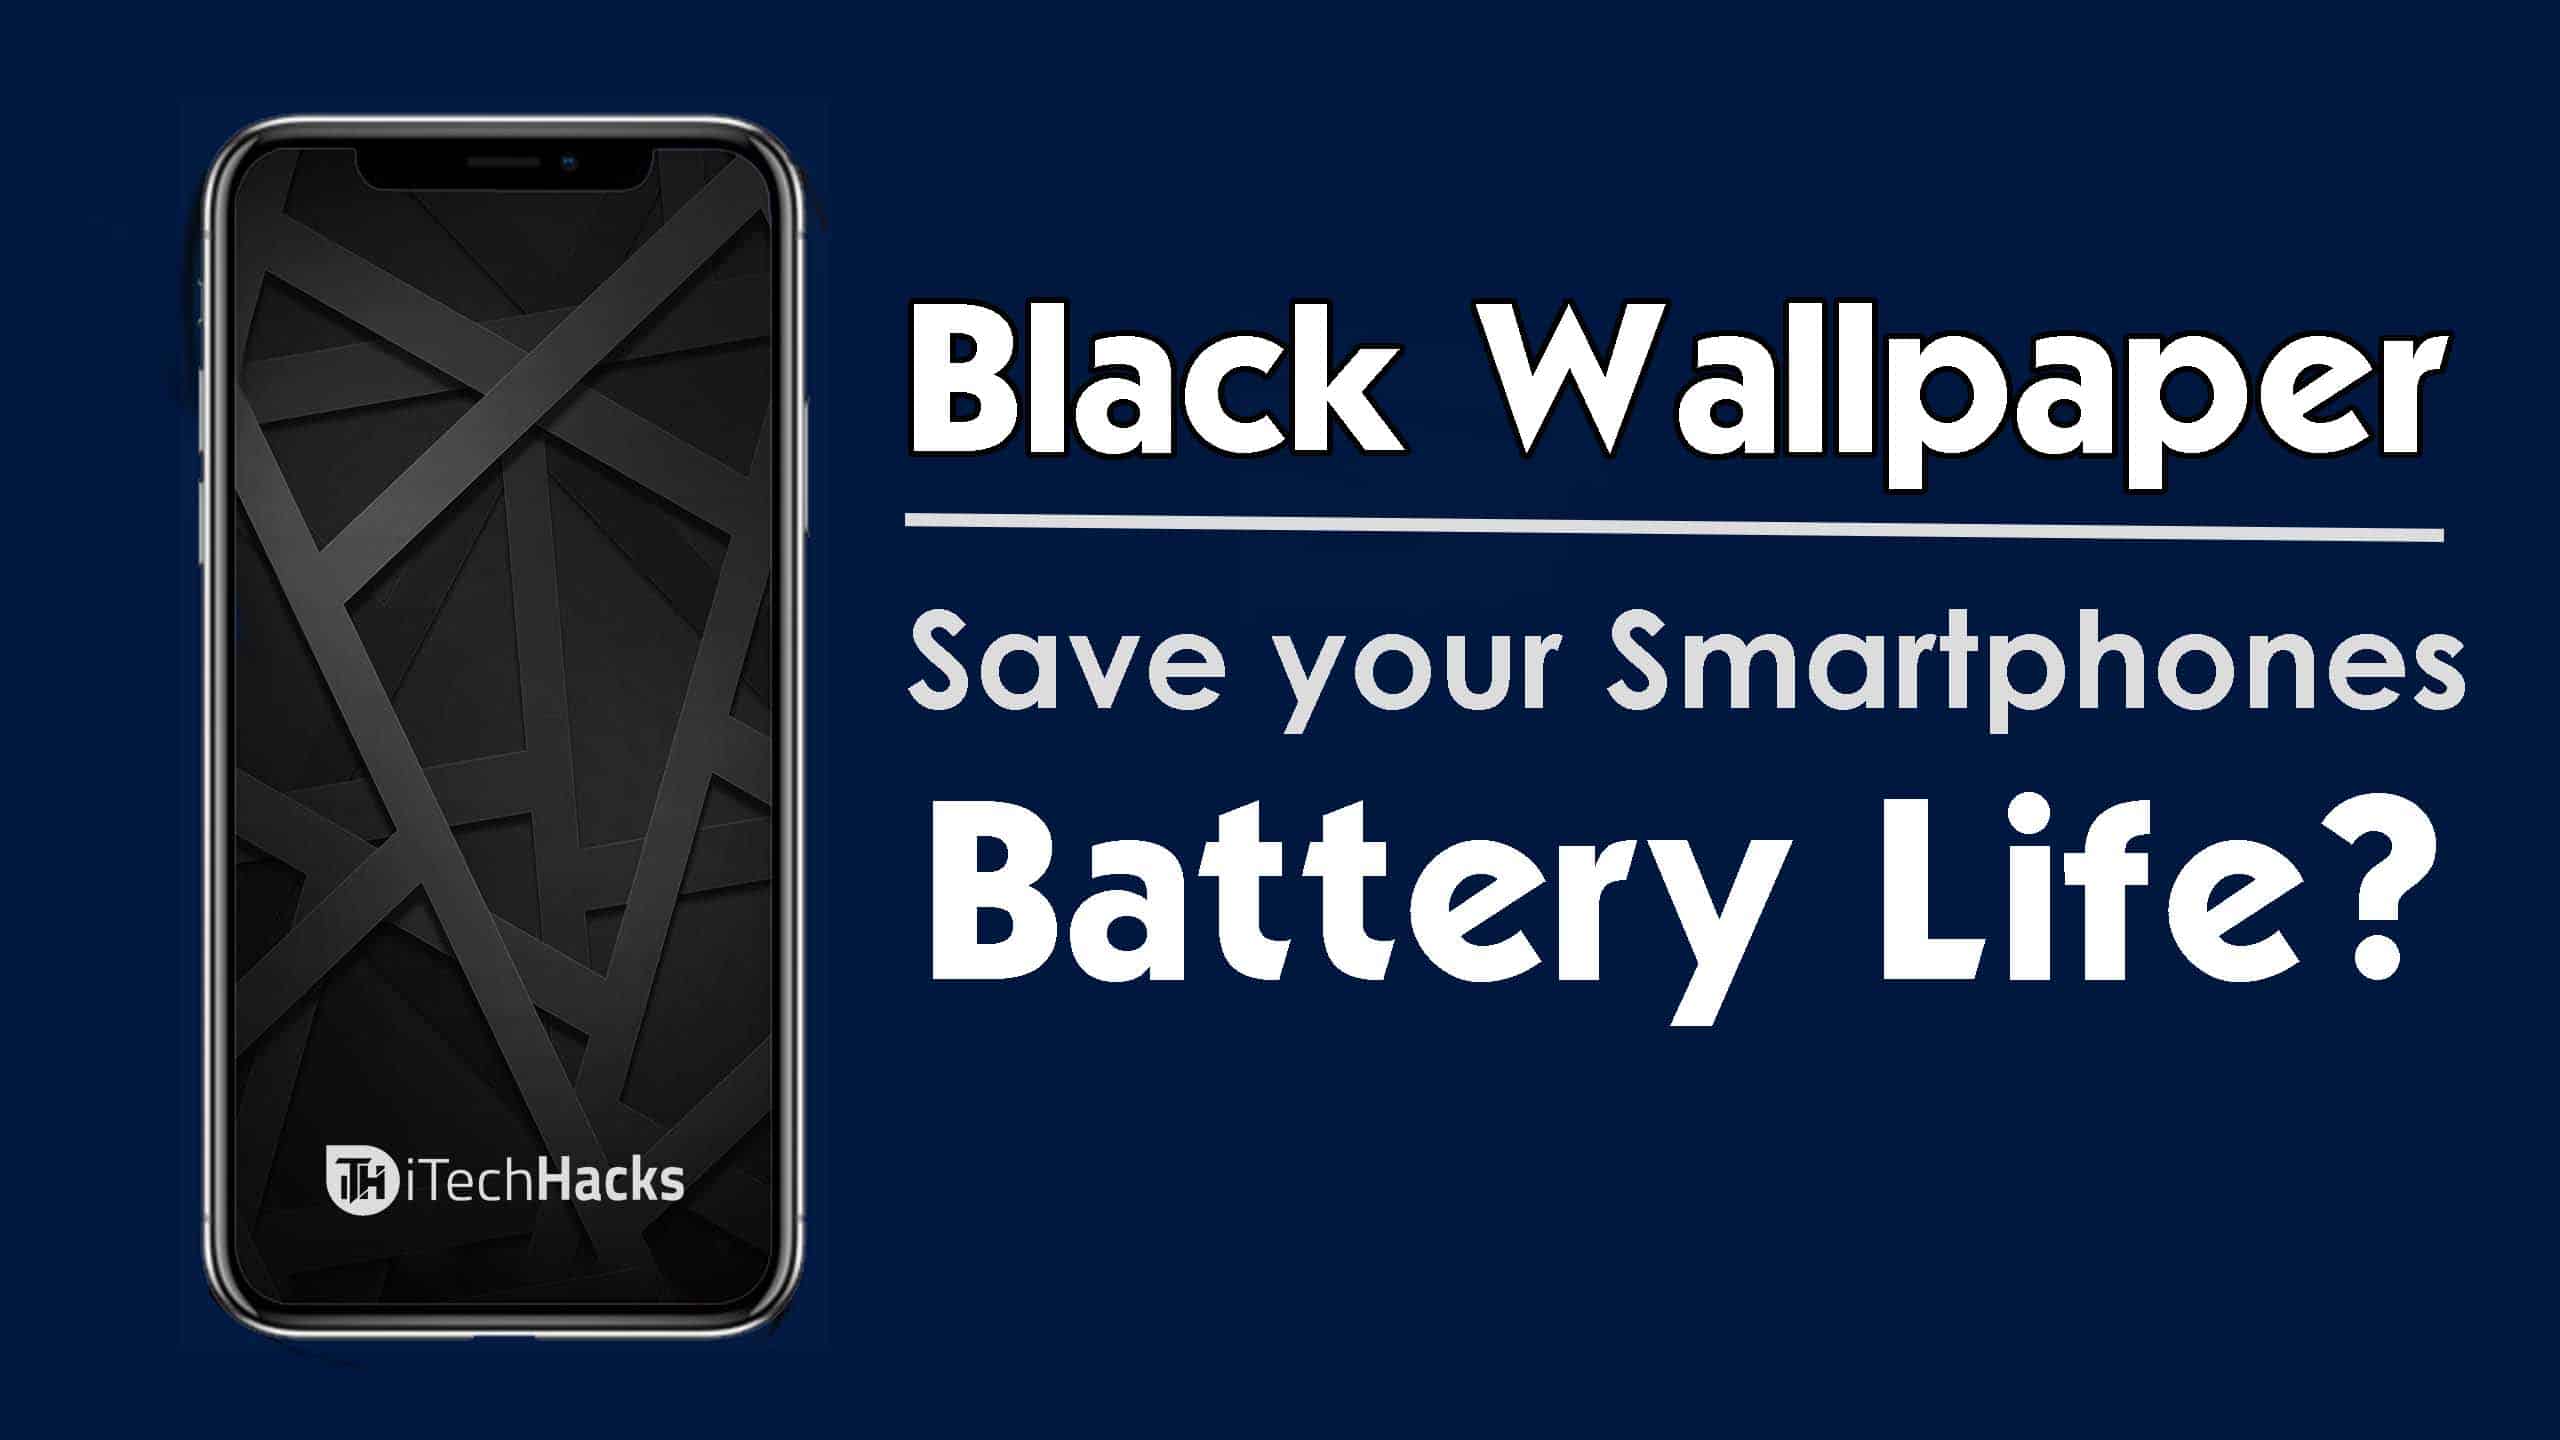 Download Black Wallpaper and Save your Android Battery? (2019)